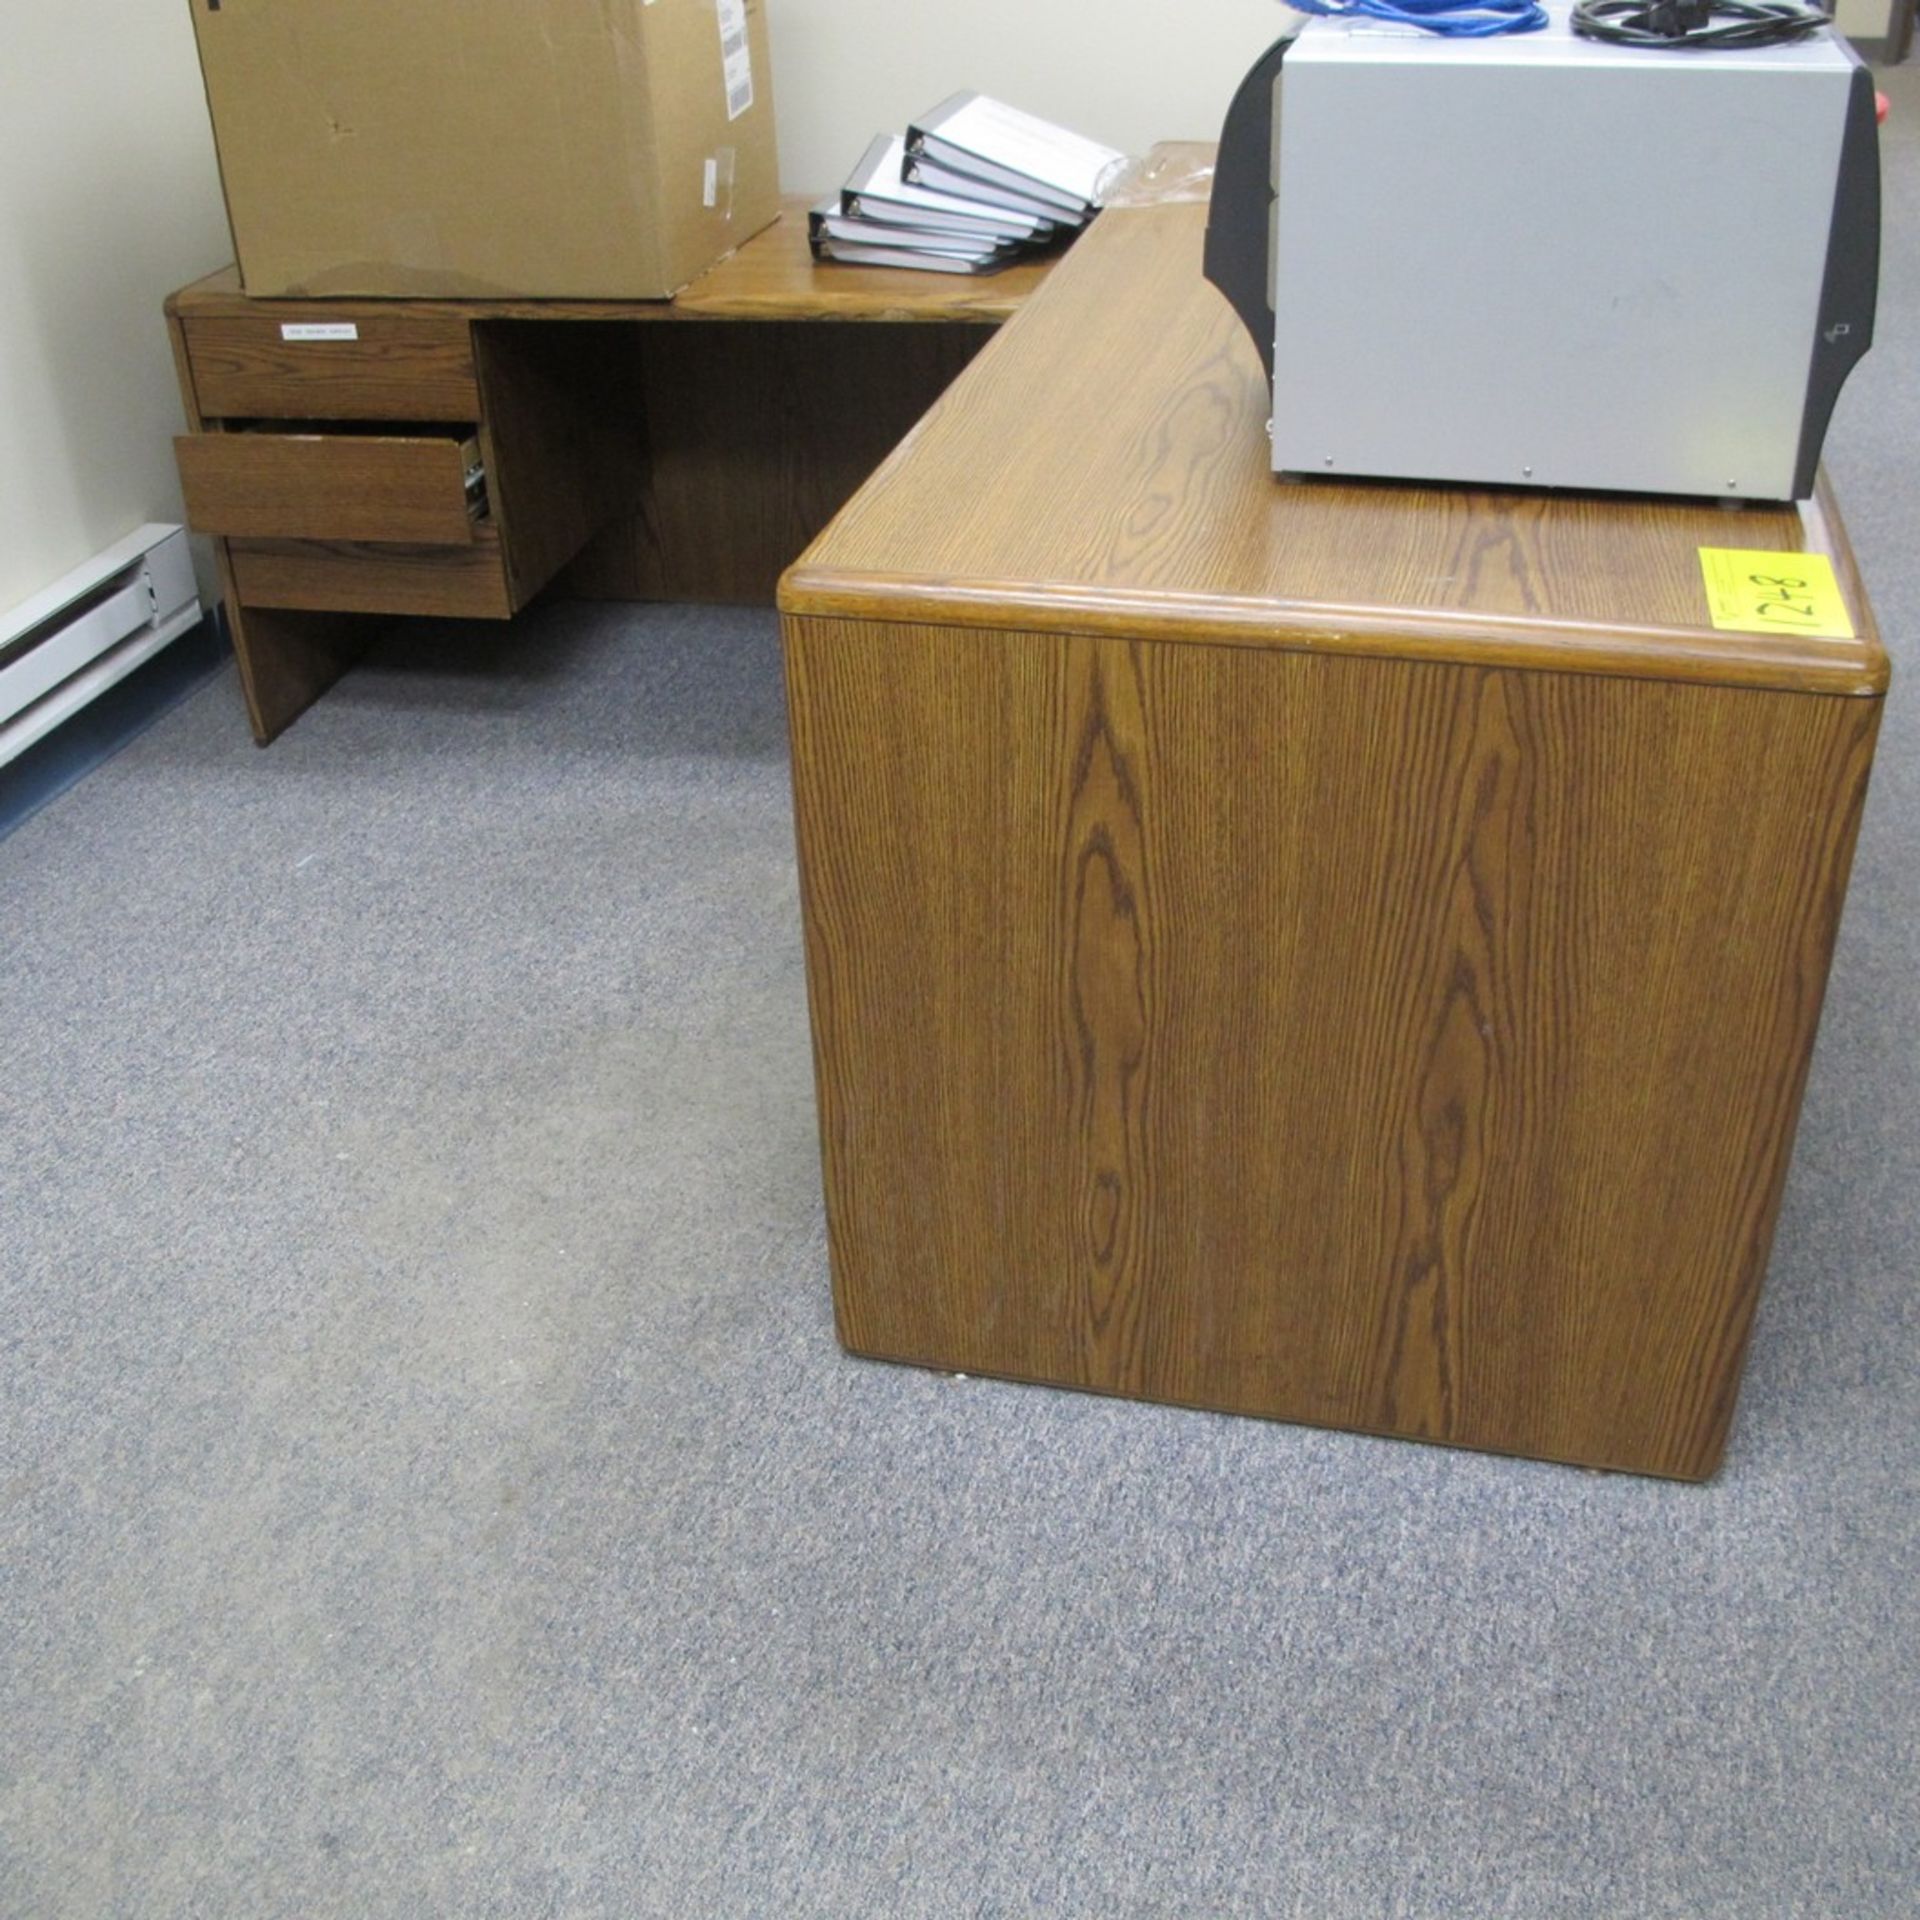 OFFICE SUITE (FURNITURE ONLY) INCLUDING L-SHAPED DESK, ROUND TABLE, SHELVING UNIT, FILE CABINET, - Image 2 of 3